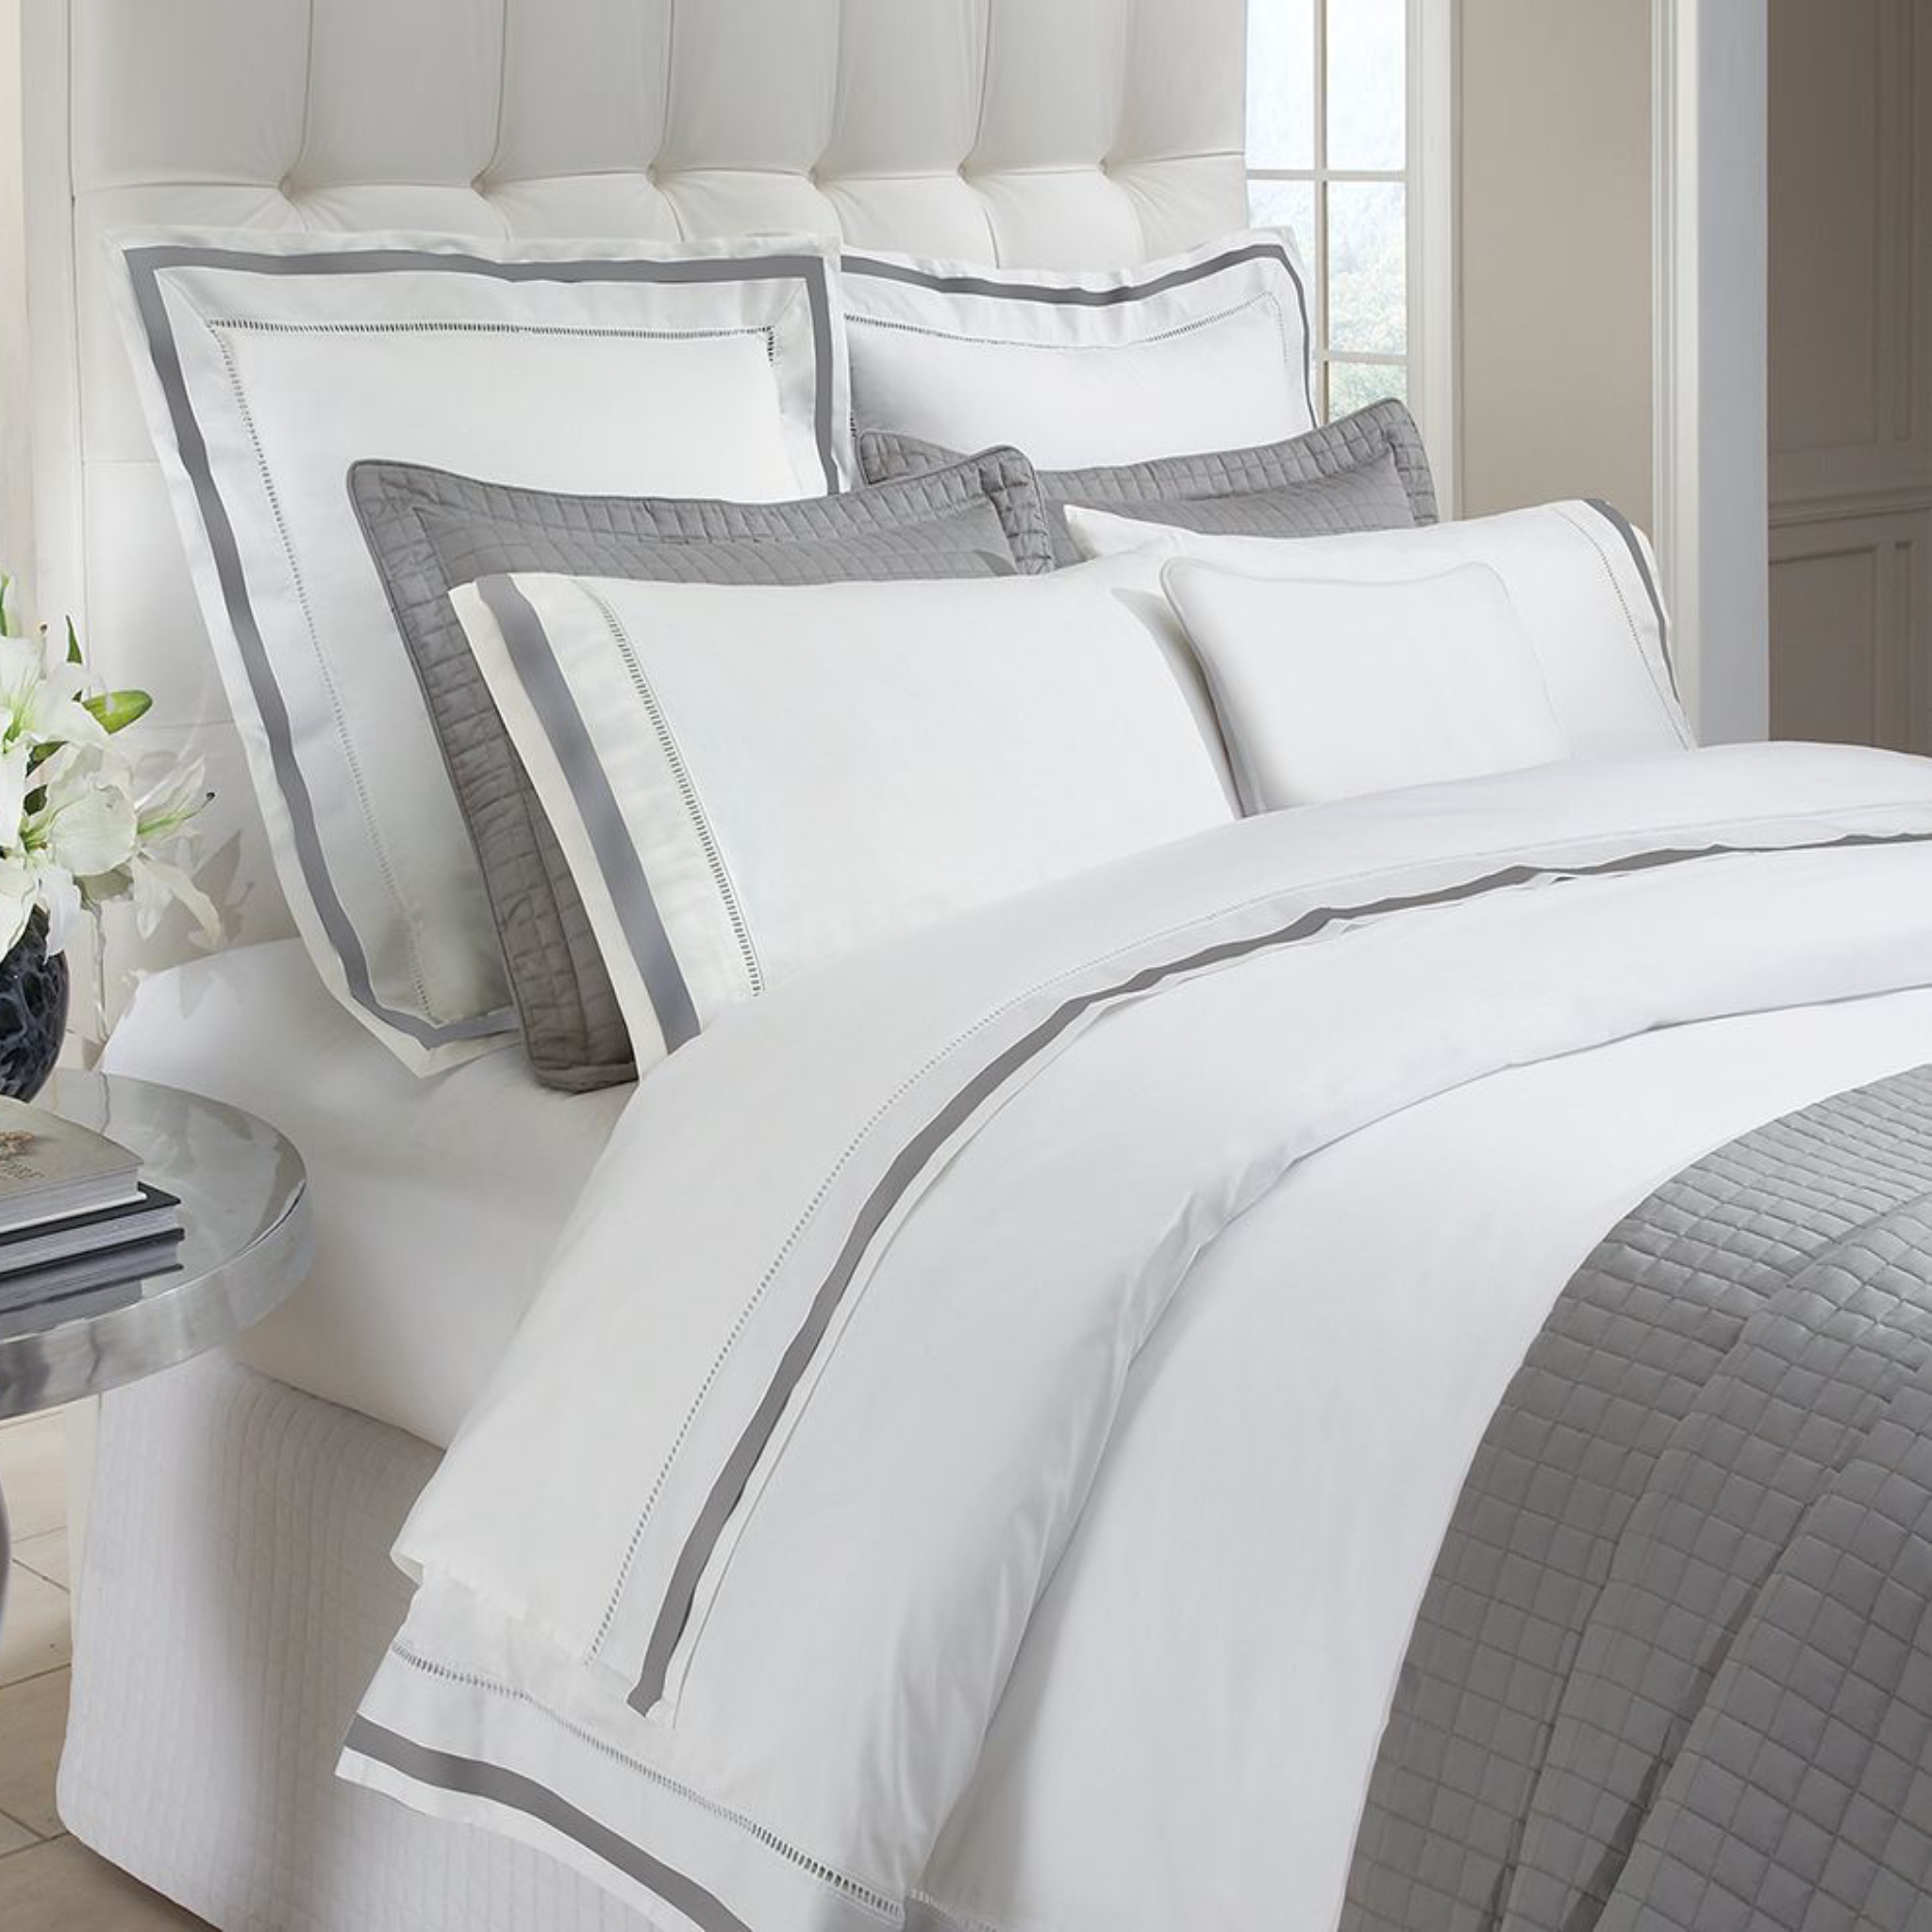 Downtown Company Chelsea Bedding